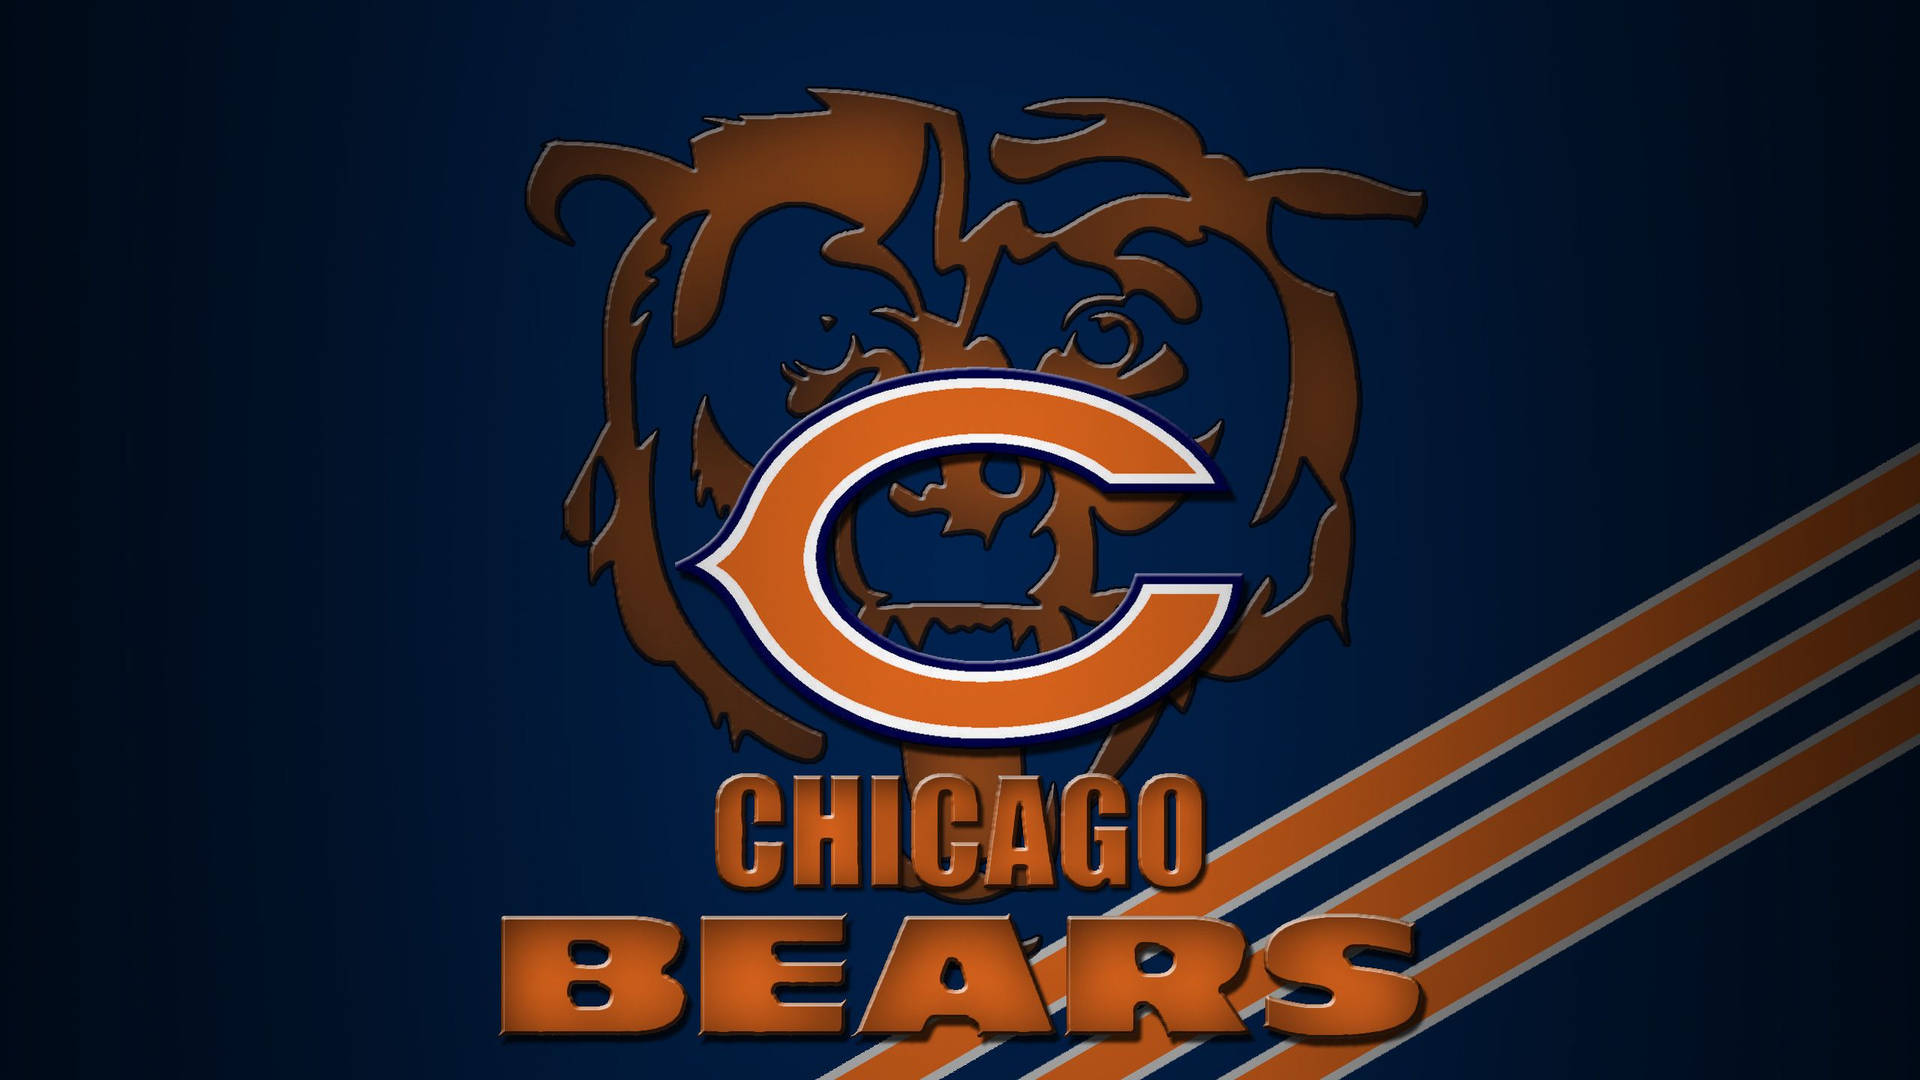 “Rallying Together with the Chicago Bears” Wallpaper